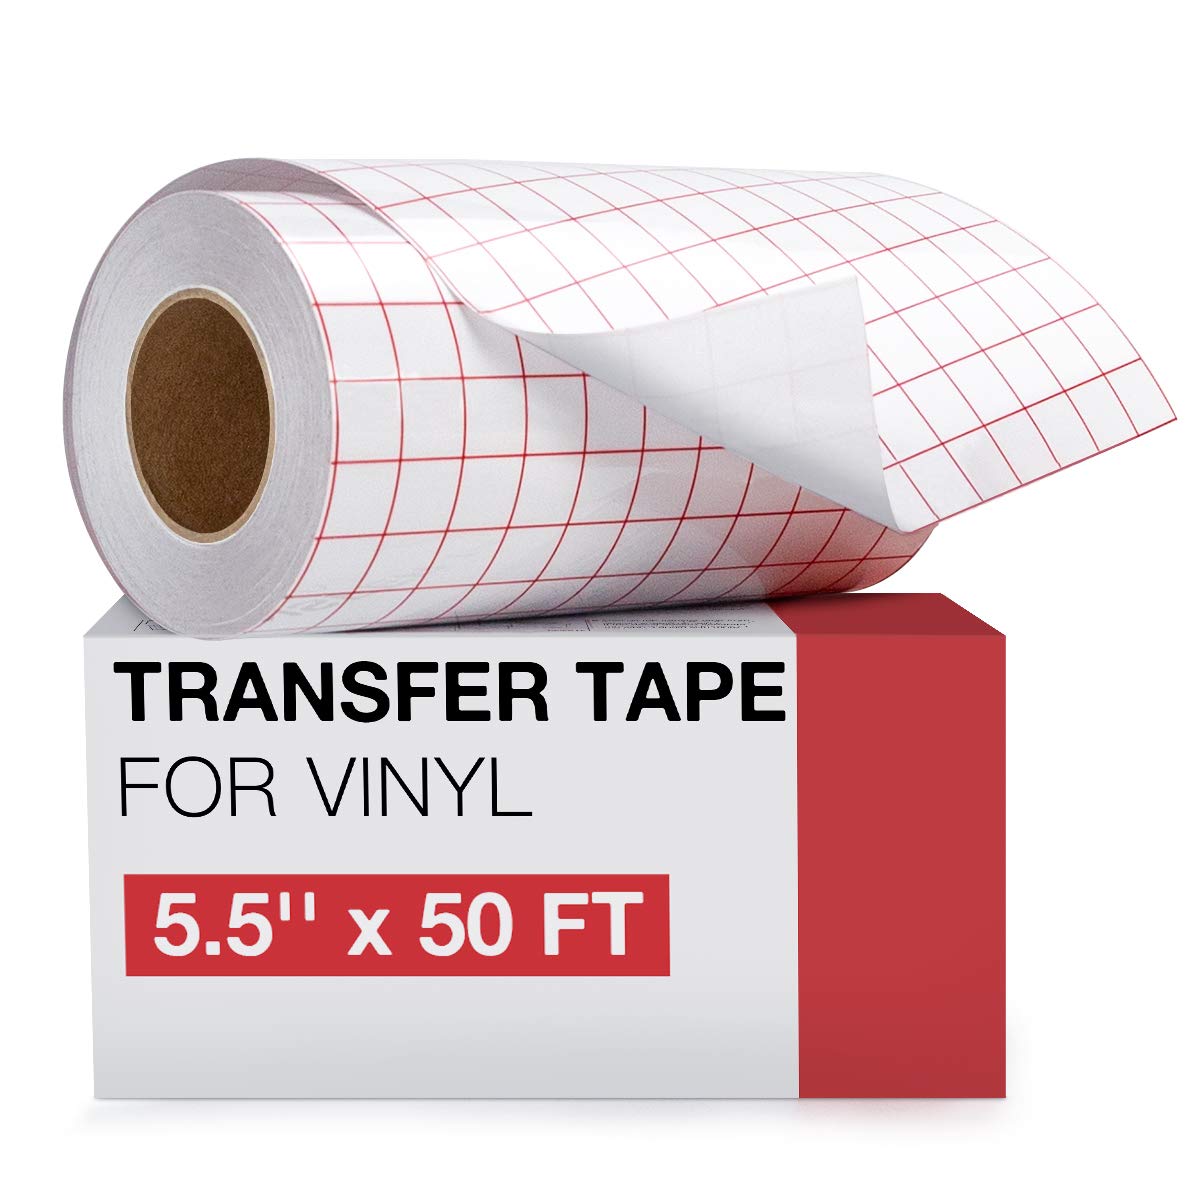 HTVRONT Transfer Tape for Vinyl- 5.5 x 50 FT w/Red Alignment Grid for  Cricut Joy and Cricut Adhesive Vinyl, Silhouette Cameo Tr